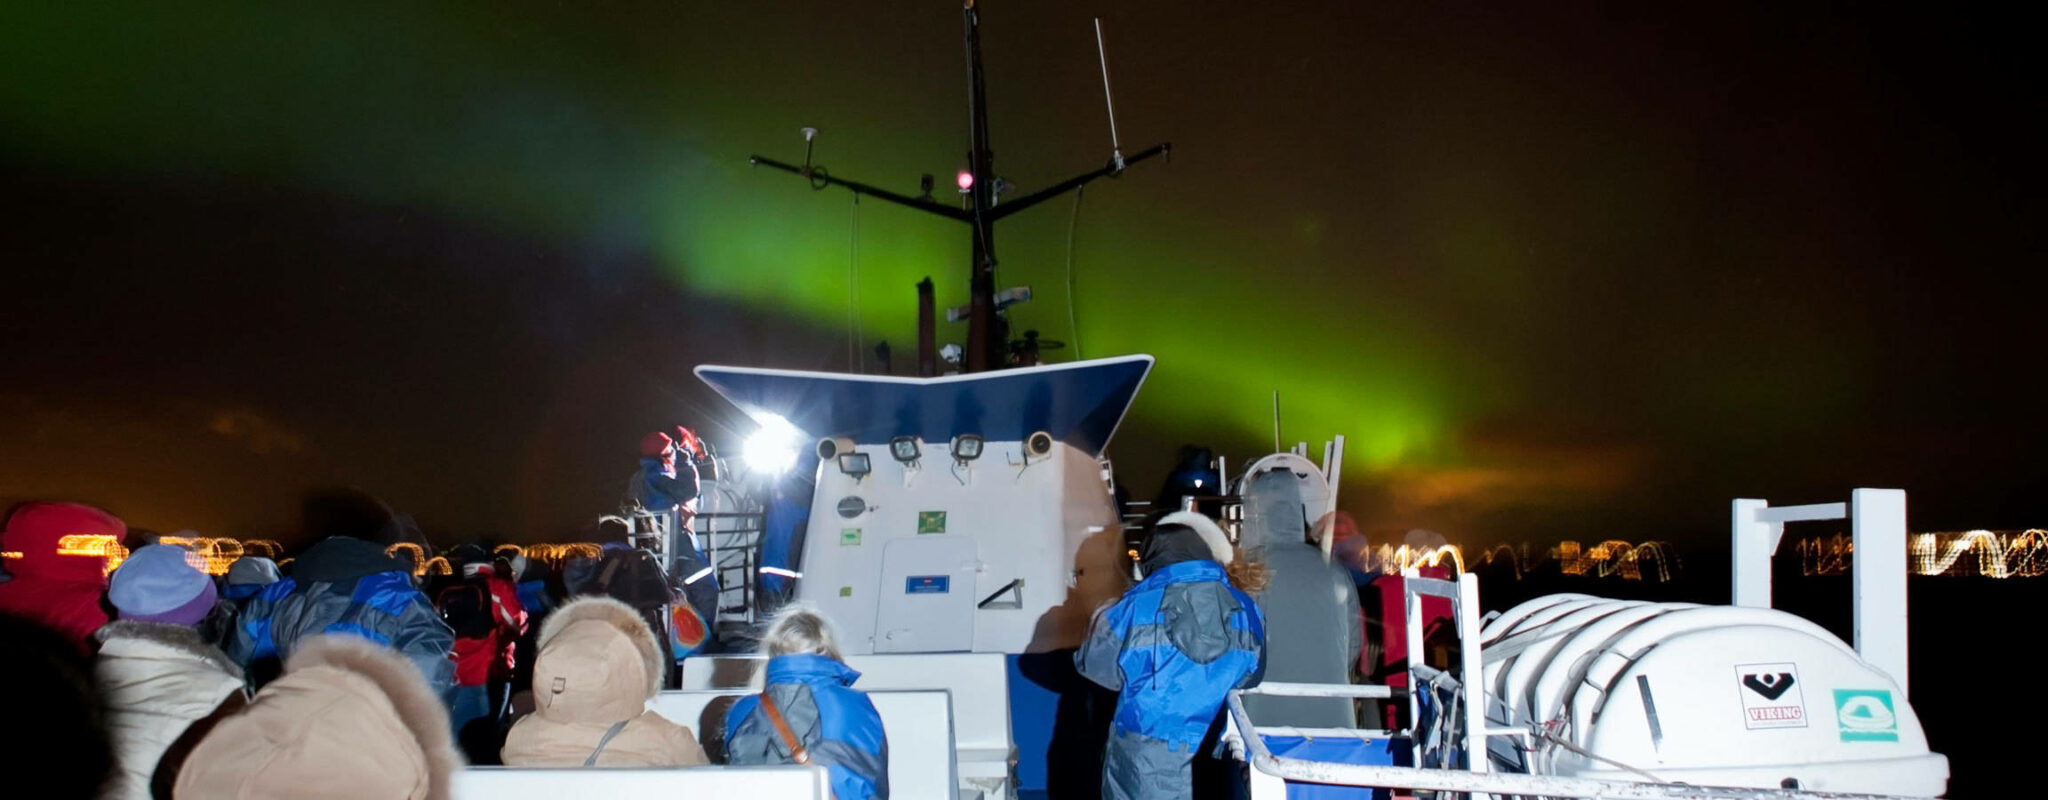 Bunch of tourists gathered on the deck of the cruise ship, observing the northern light display